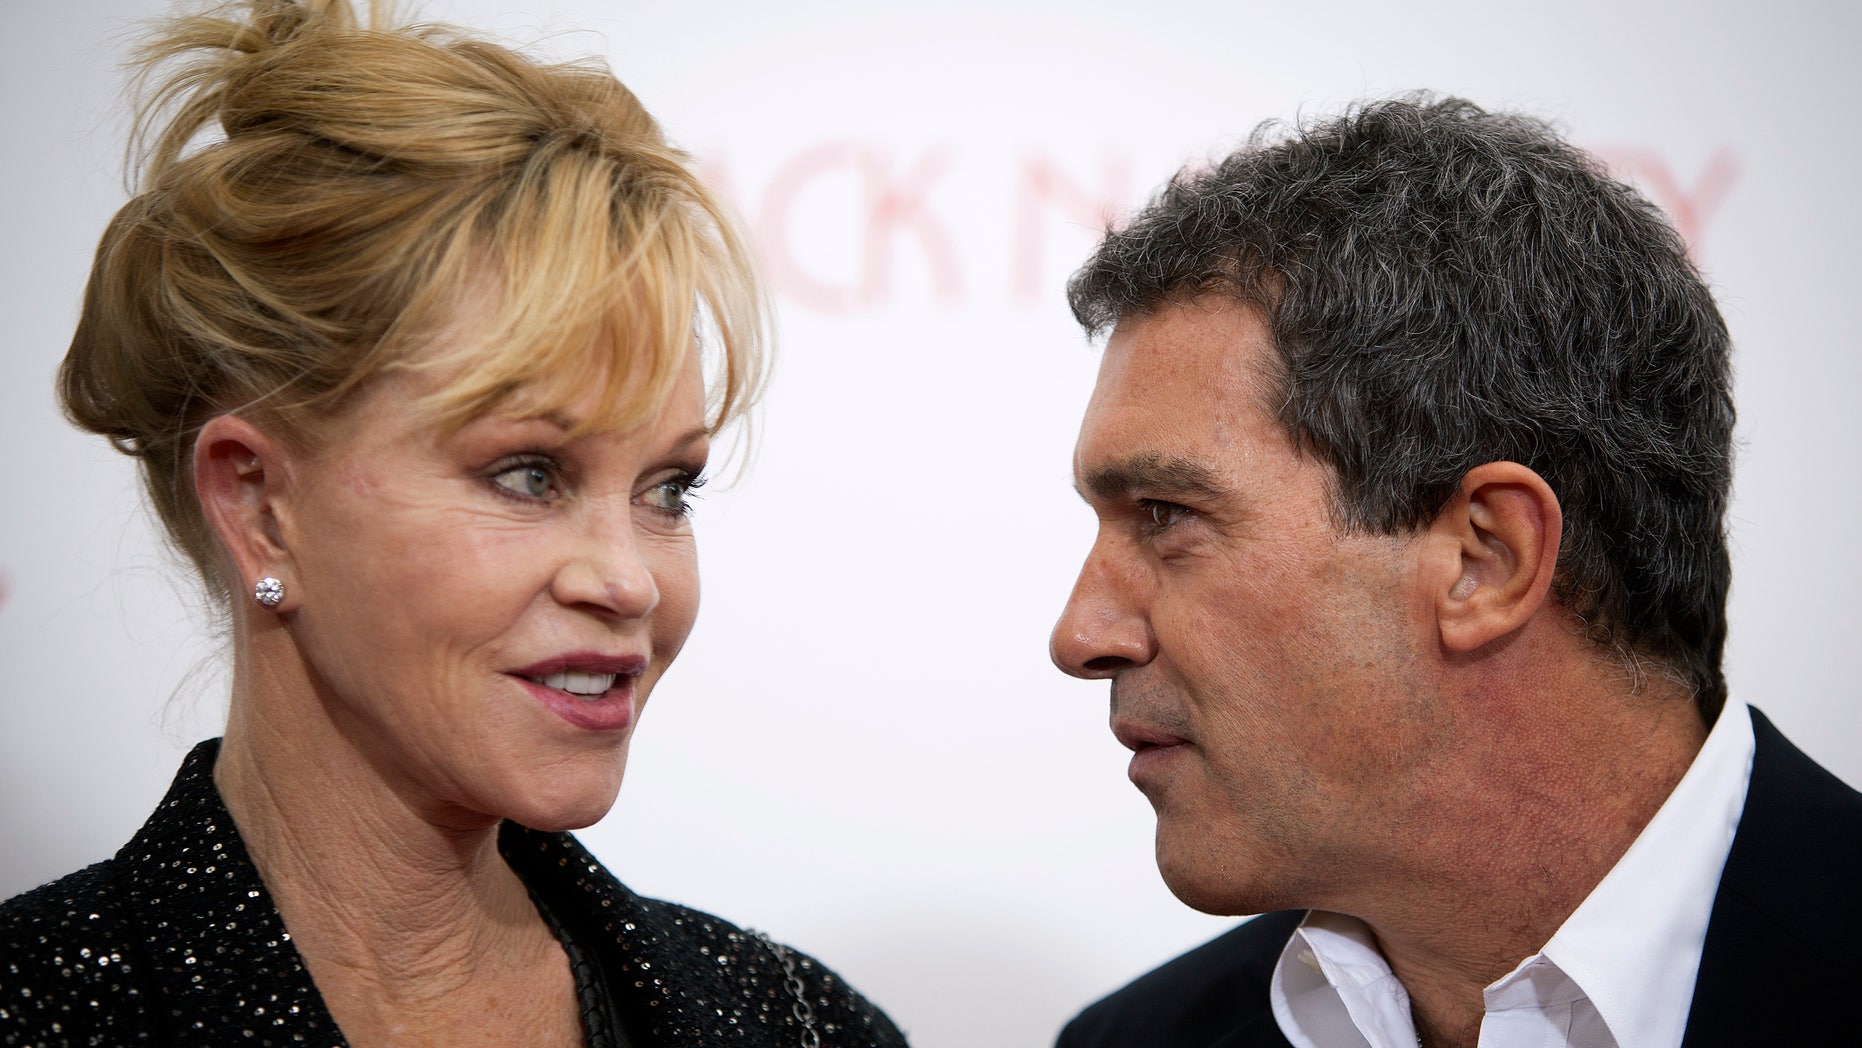 Melanie Griffin and Antonio Banderas reportedly drifting apart 'for years' | Fox News